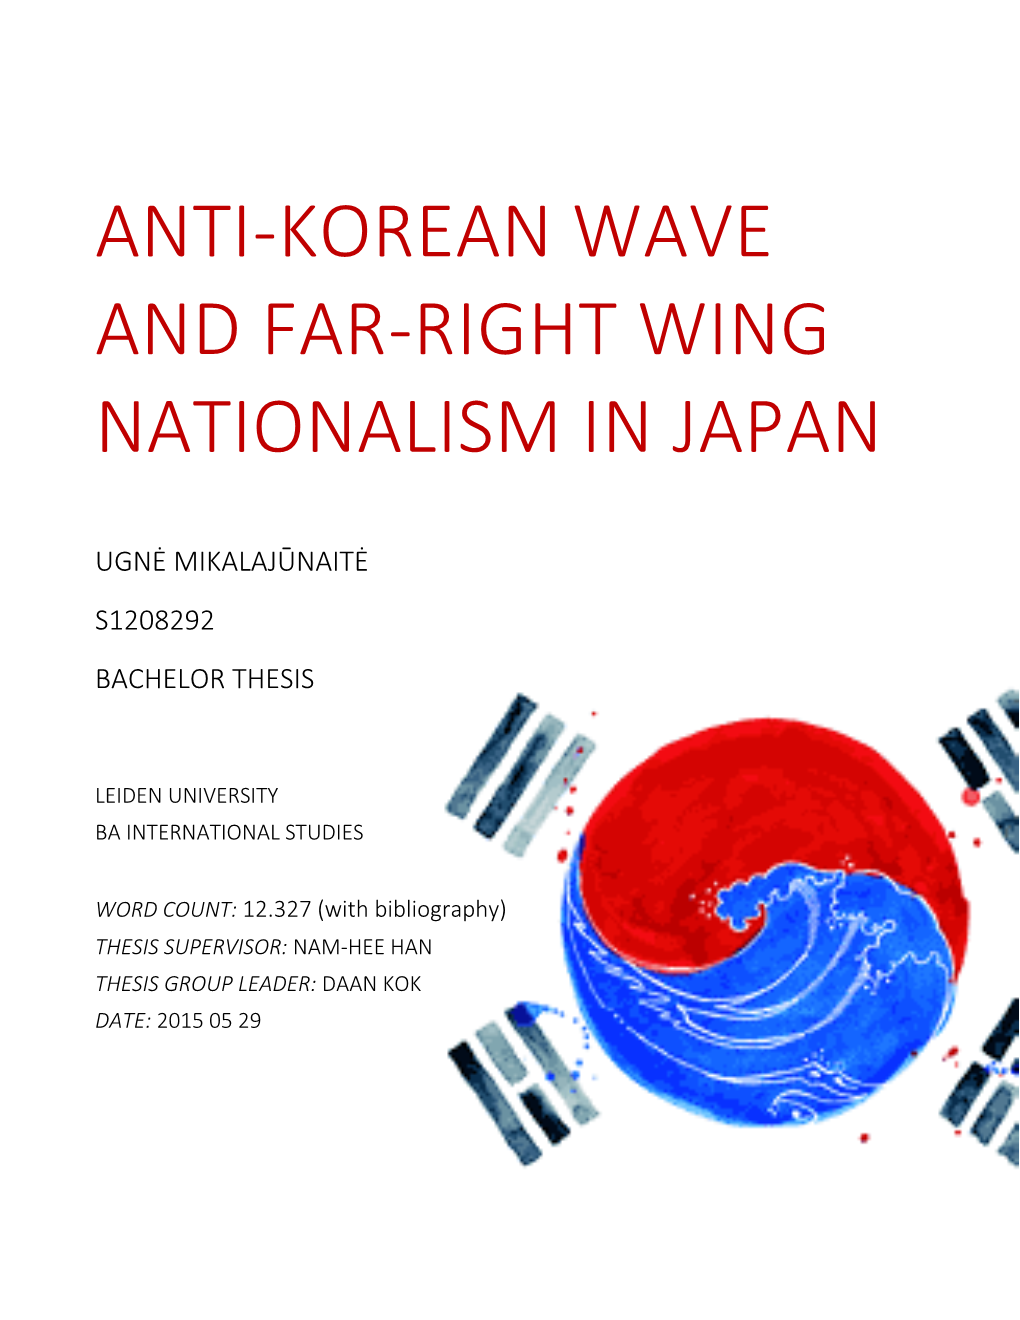 Anti-Korean Wave and Far-Right Wing Nationalism in Japan